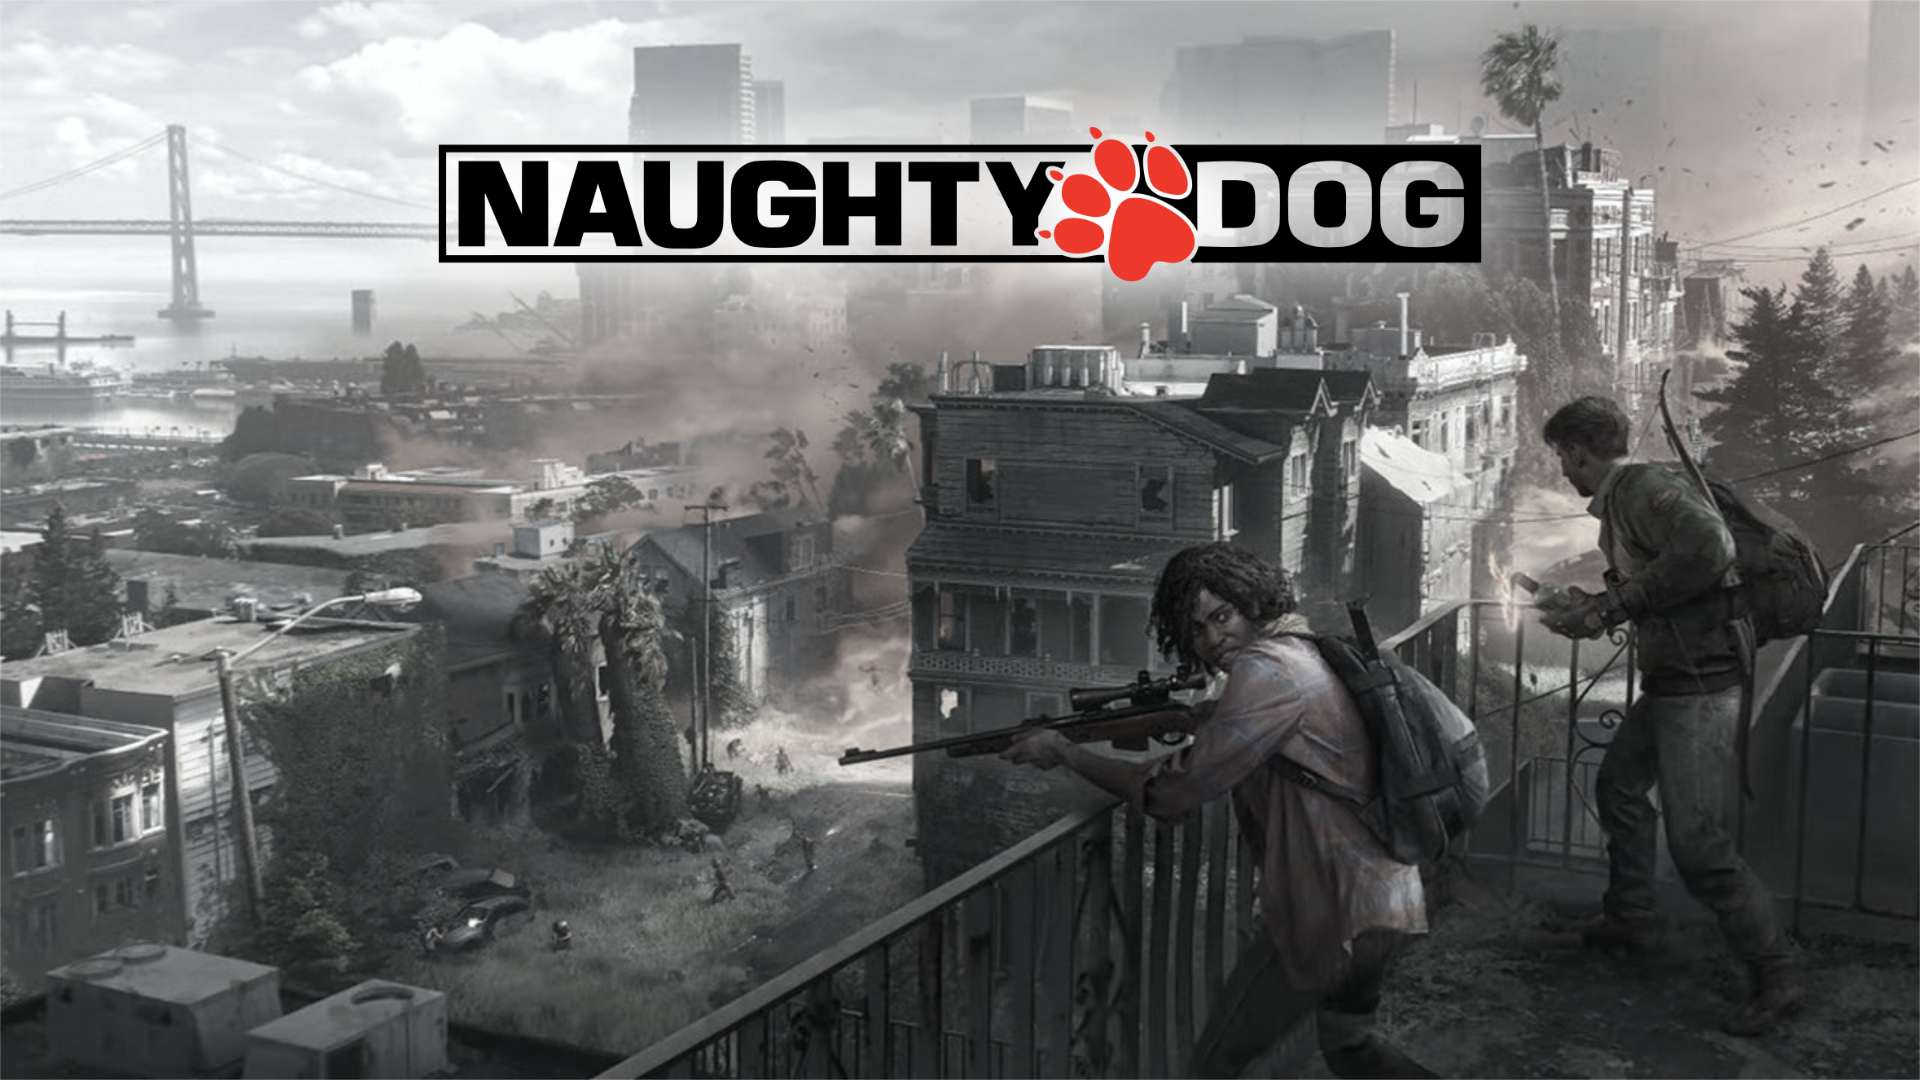 Next Naughty Dog game, is it TLoU remake, multiplayer or new IP?